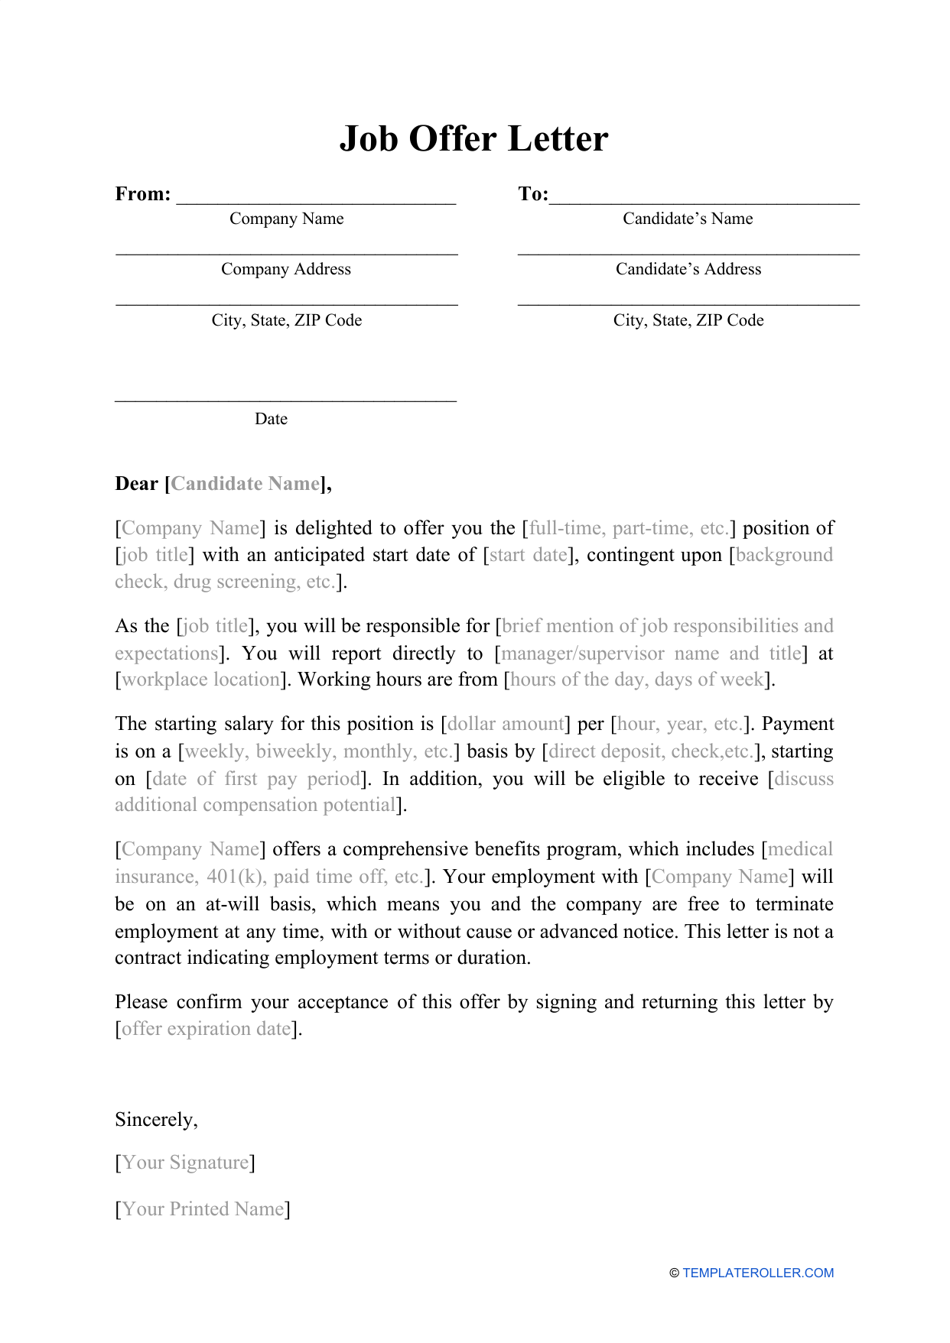 Job Offer Letter Template, Page 1